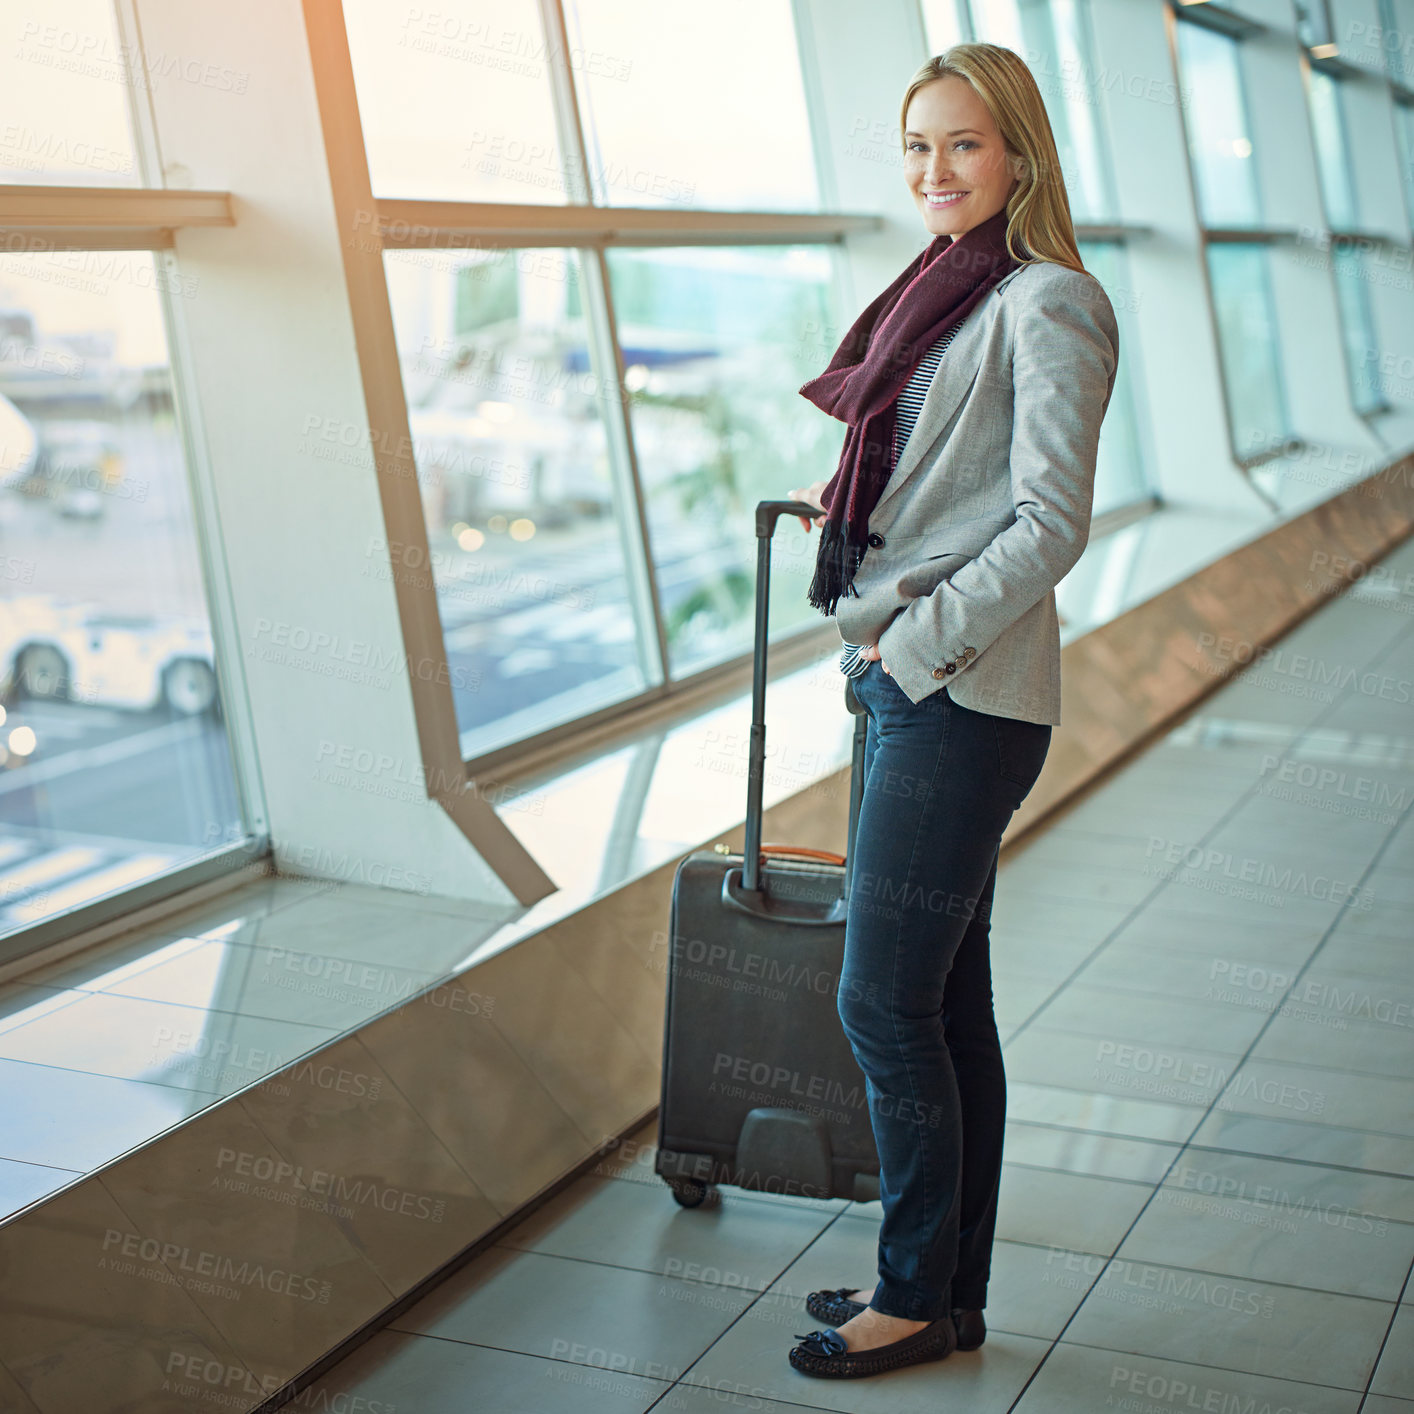 Buy stock photo Portrait of a young woman standing with her luggage in an airport